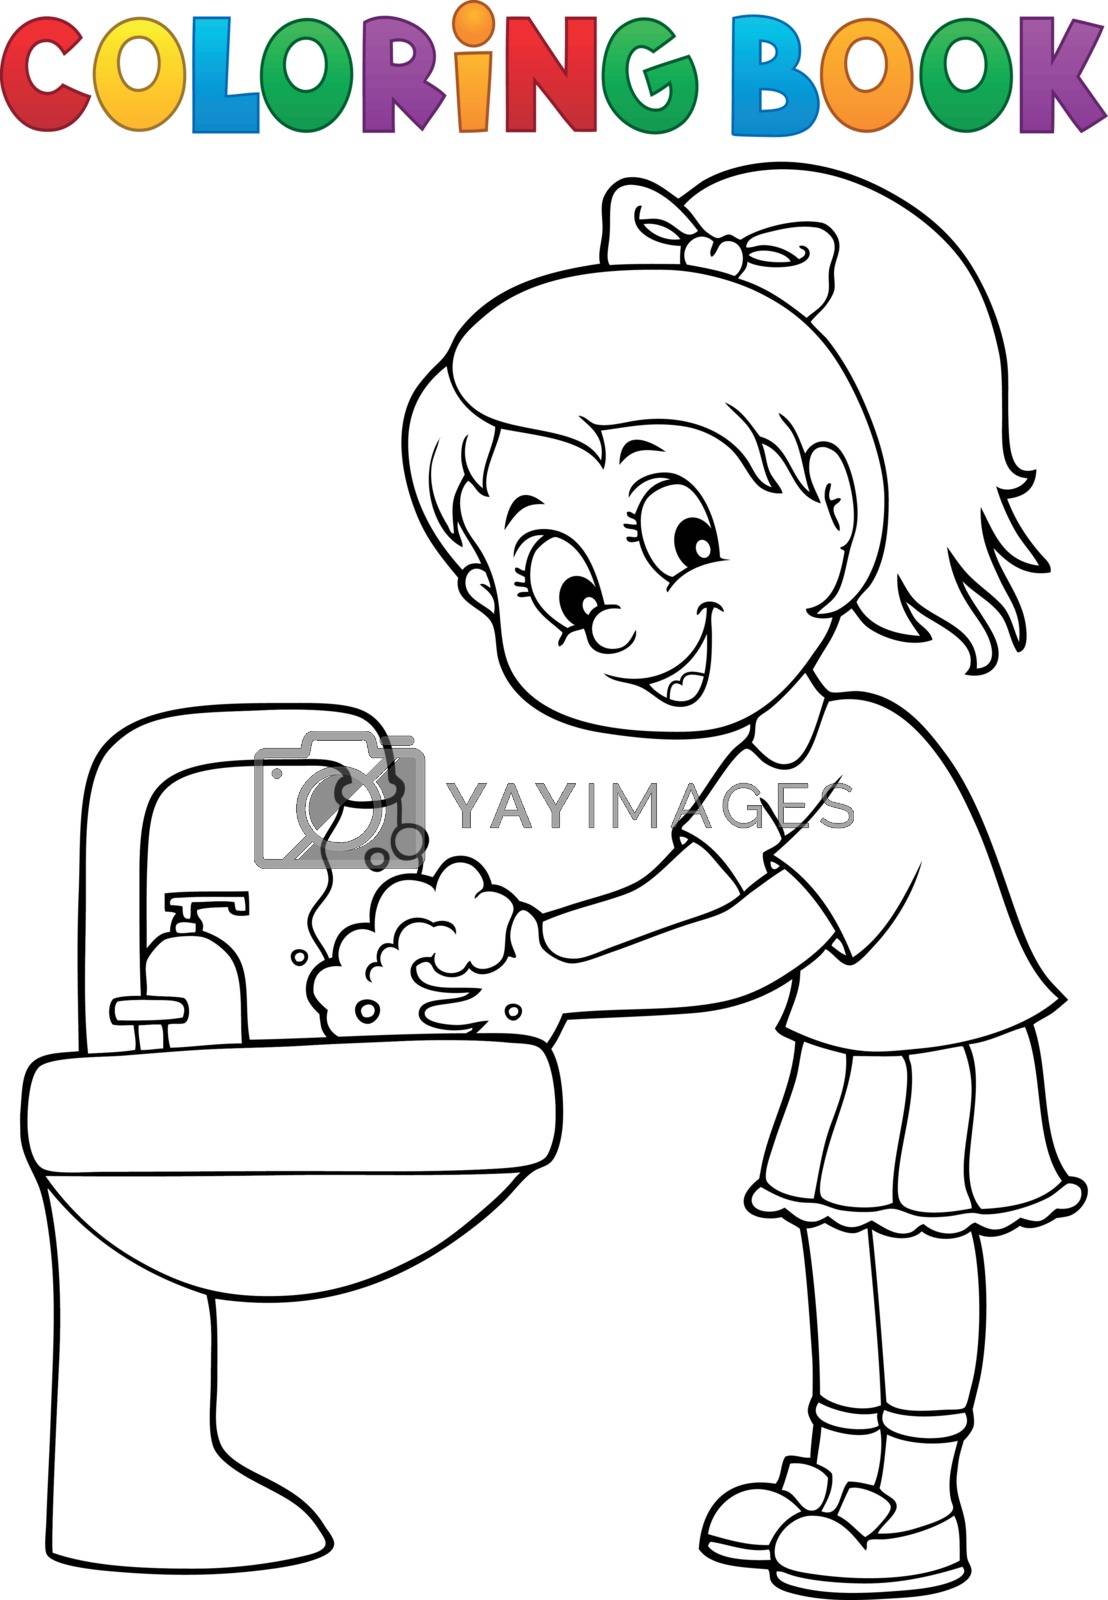 Royalty free image of Coloring book girl washing hands theme 1 by clairev